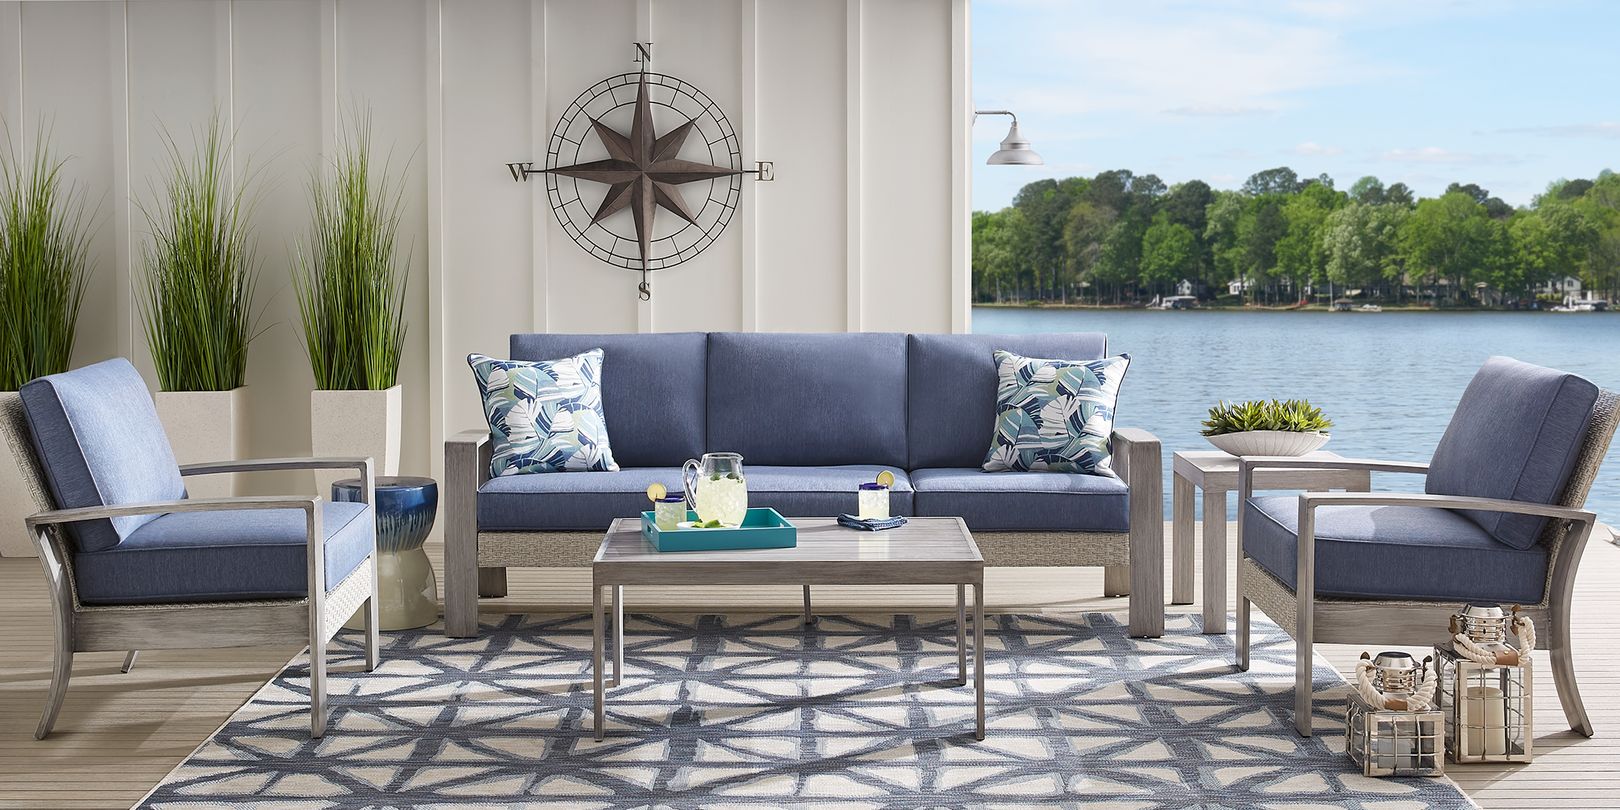 Photo of a gray wooden seating set with blue cushions